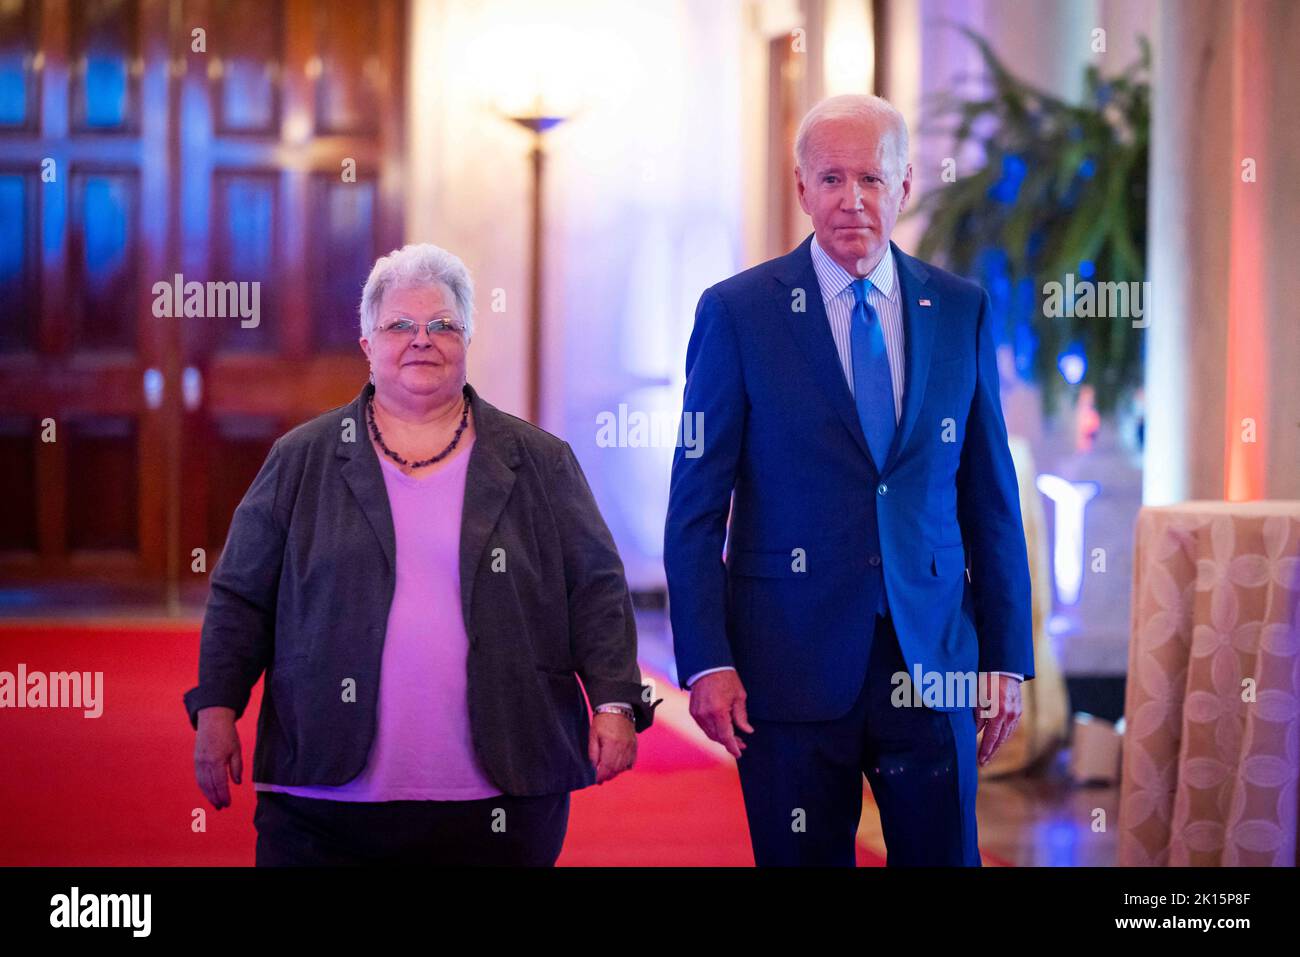 US President Joe Biden (R) along with Susan Bro (L) prepares to speak at the United We Stand Summit in the East Room of the White House in Washington, DC, USA, 15 September 2022. Bro is the mother of Heather Heyer, who was killed at the Unite the Right rally in Charlottesville, Virginia in 2017. Stock Photo